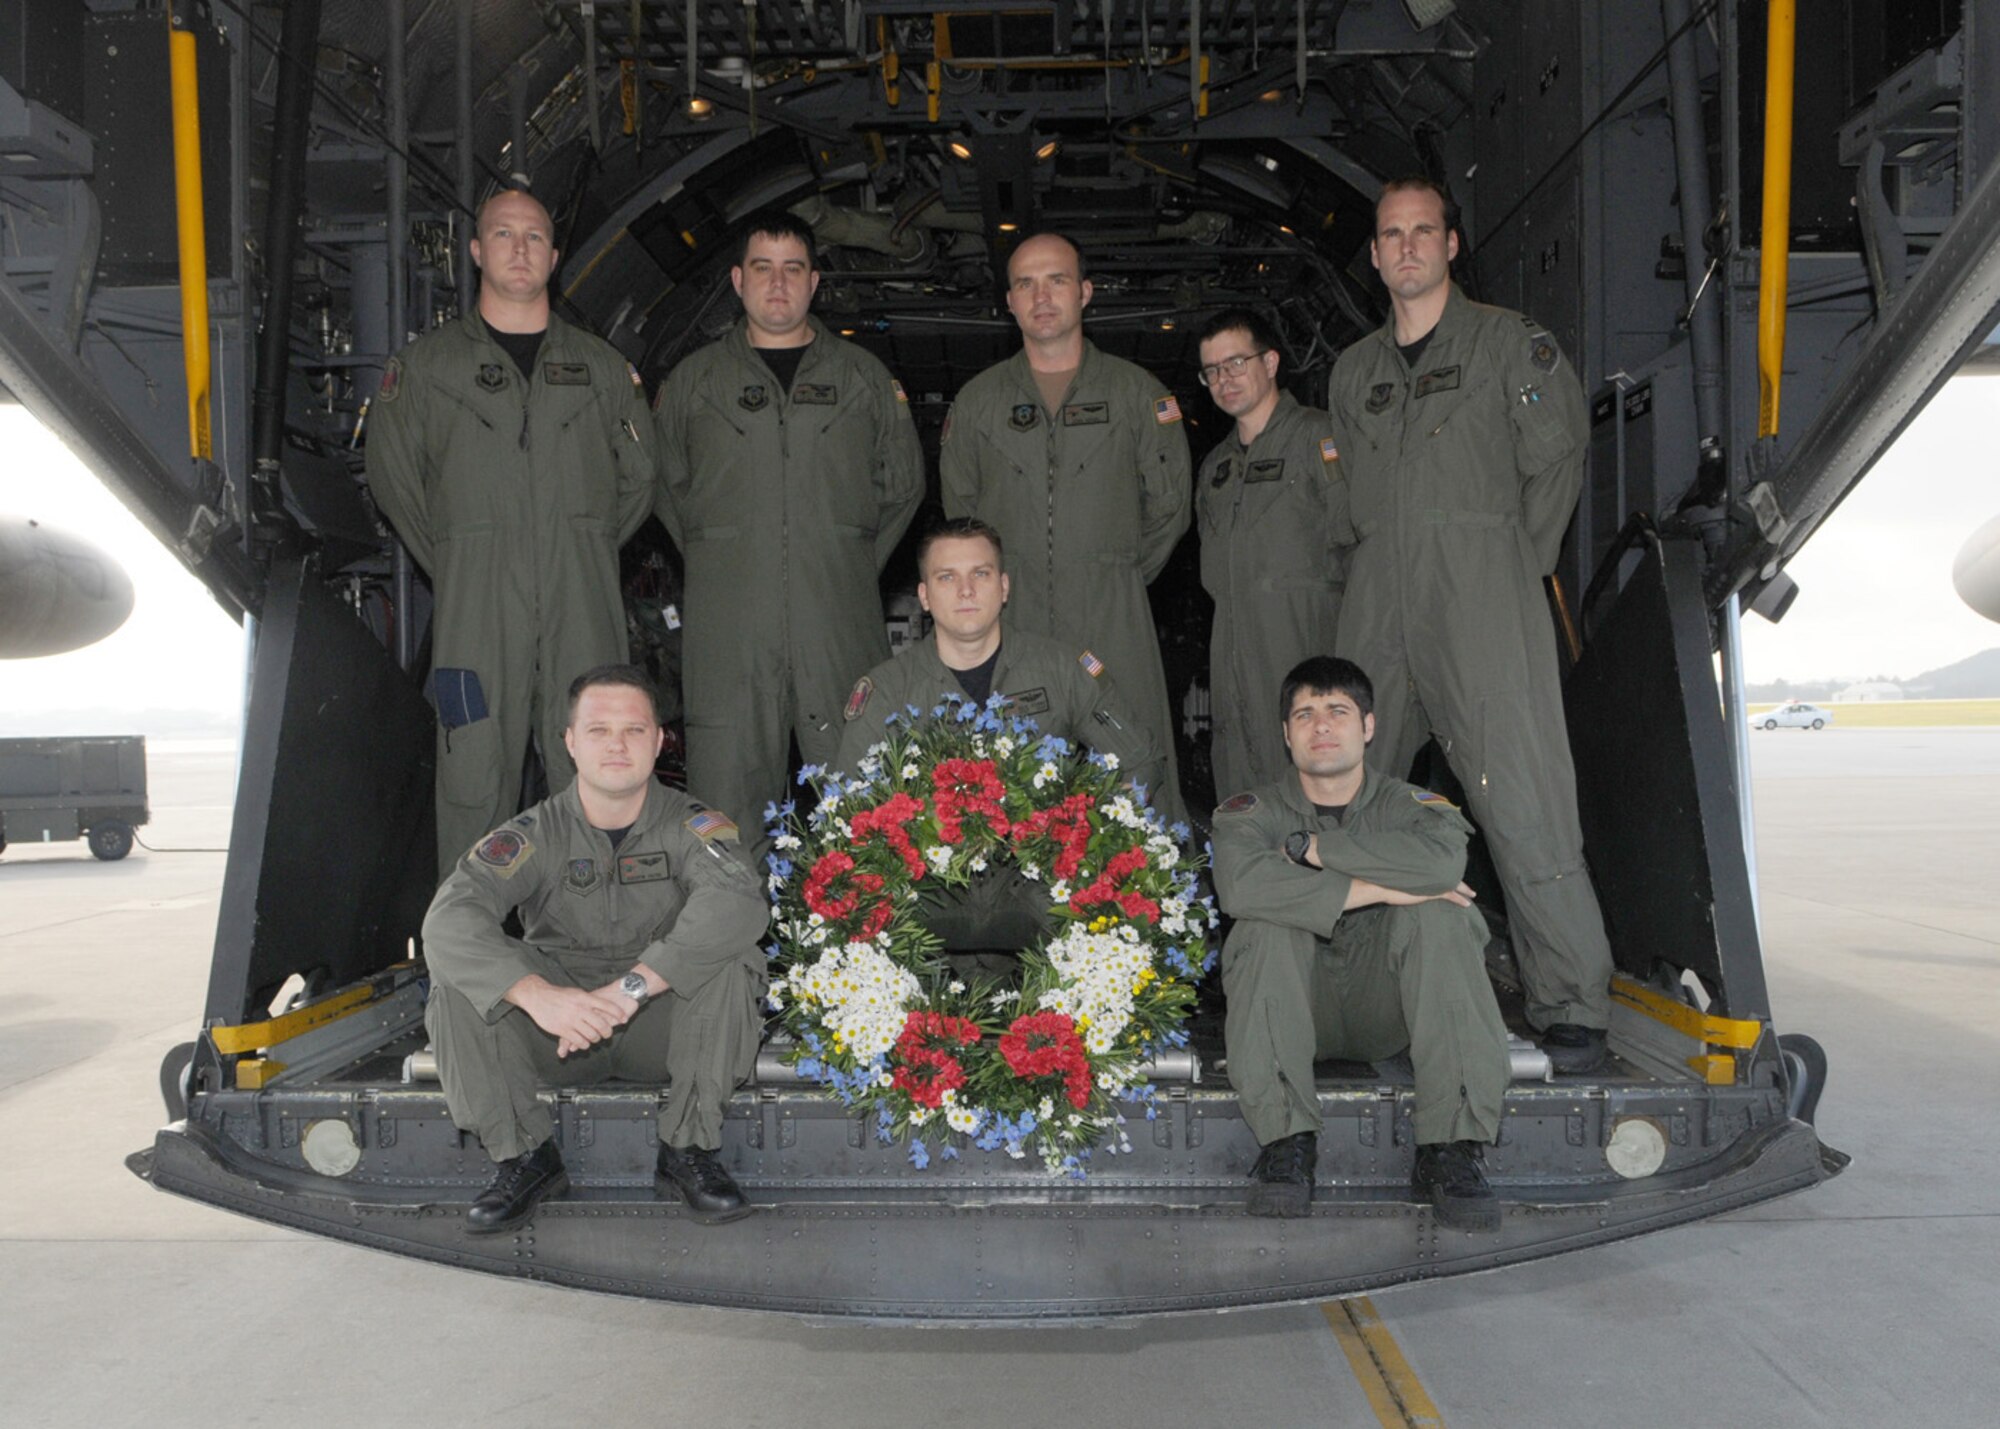 KADENA AIR BASE, Japan -- The crew of GOOSE99 poses for a photo with the memorial wreath on the back of a 1st Special Operations Squadron MC-130H Combat Talon II here Feb. 26 before flying a memorial flight to honor fallen brethren that were lost 28 years ago when a 1st SOS MC-130E, call sign STRAY59, crashed during an exercise killing eight crew members and 15 passengers. The crew of GOOSE99 flew from here to reach the exact coordinates of the crash site to release the ceremonial wreath. The memorial flight has been flown every year since the tragic accident in 1981. The crew members of GOOSE99 are (from left to right): Back row:  Capt. Houston Hodgkinson, Staff Sgt. Matthew Furtick, Maj. John Rensel, Staff Sgt. Christopher DeAngelis, and Capt. Richard Obert.   Front row: Capt. Andrew Payne, Staff Sgt. Nicholas Adams, and Staff Sgt. Steve Presler. (U.S. Air Force photo by Tech. Sgt. Aaron Cram)